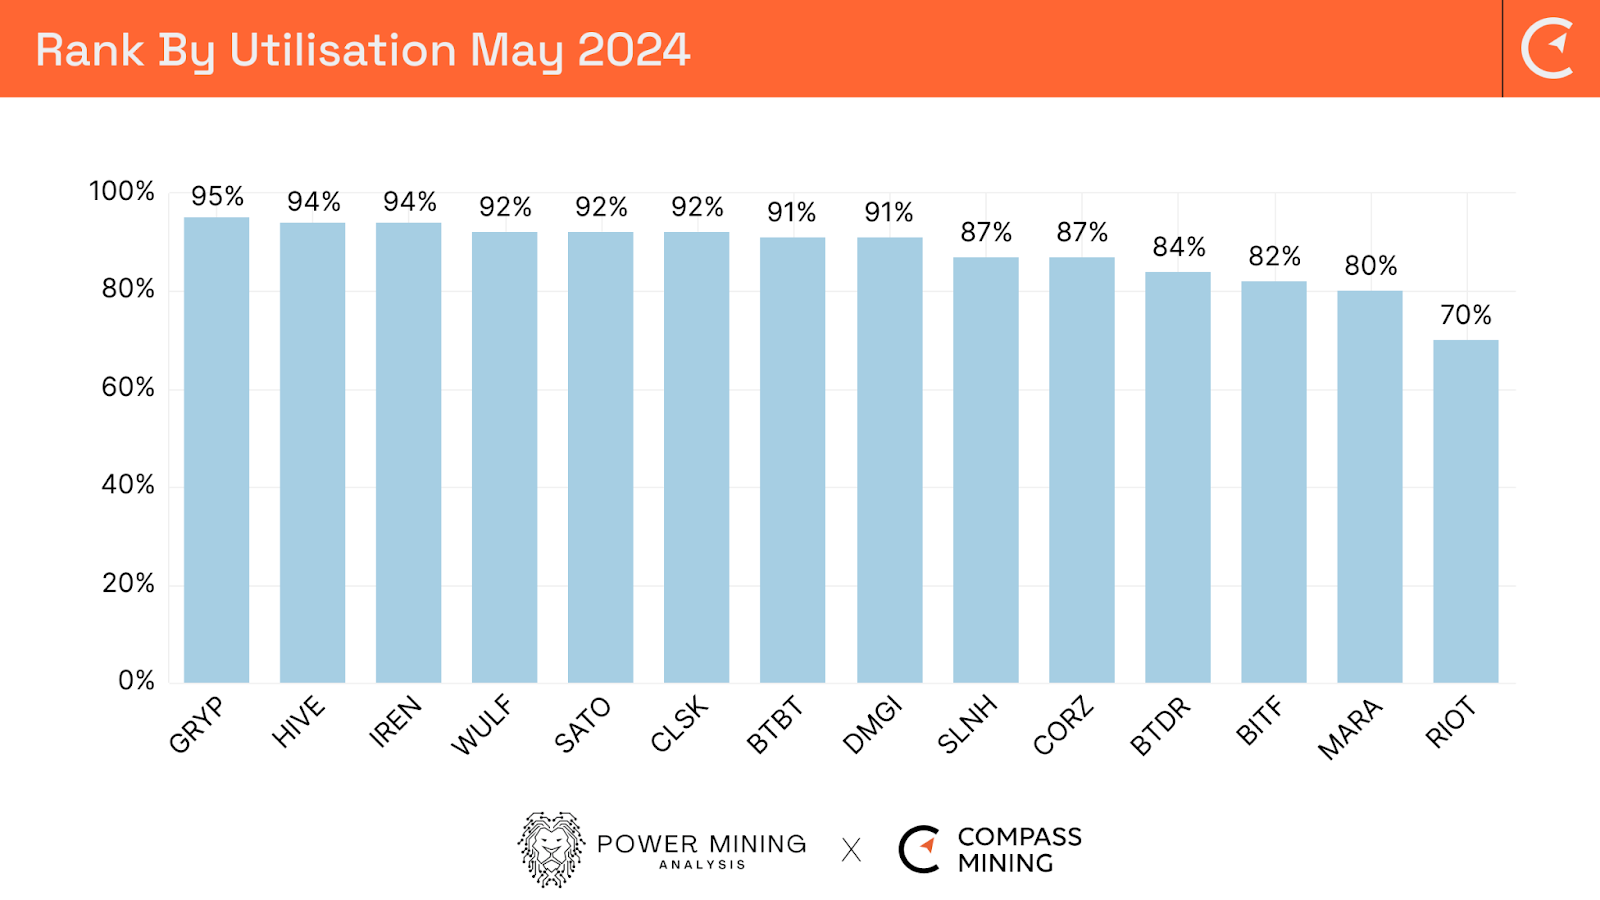 Bitcoin Mining Industry Report: 
May 2024 M&A activity, Analysis & Operational Updates